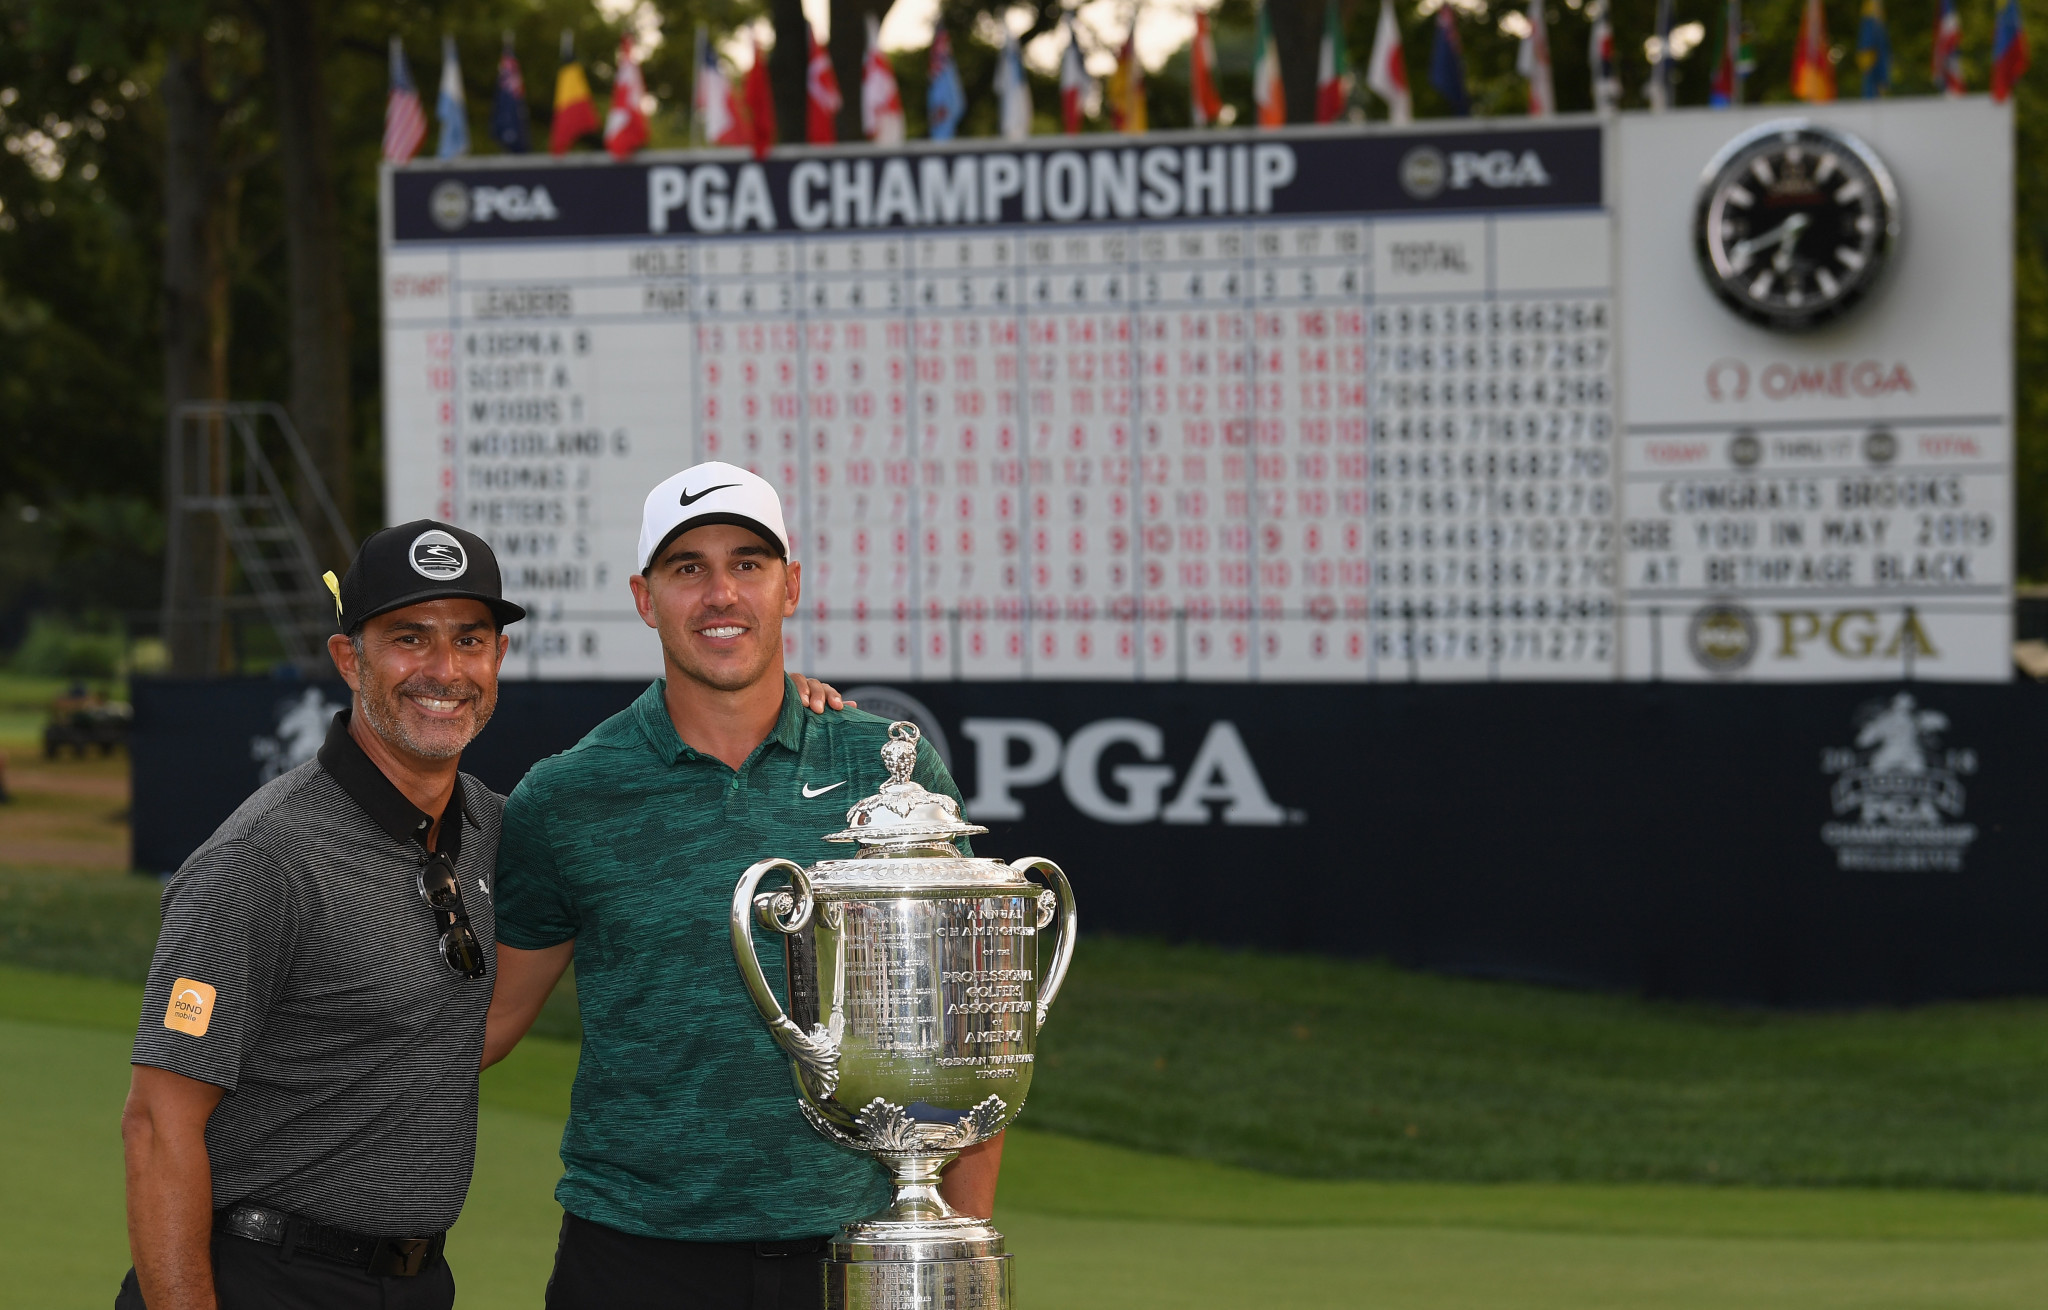 World number four Brooks Koepka has won the US PGA Championship at Bellerive to claim his third major title in 14 months ©Getty Images